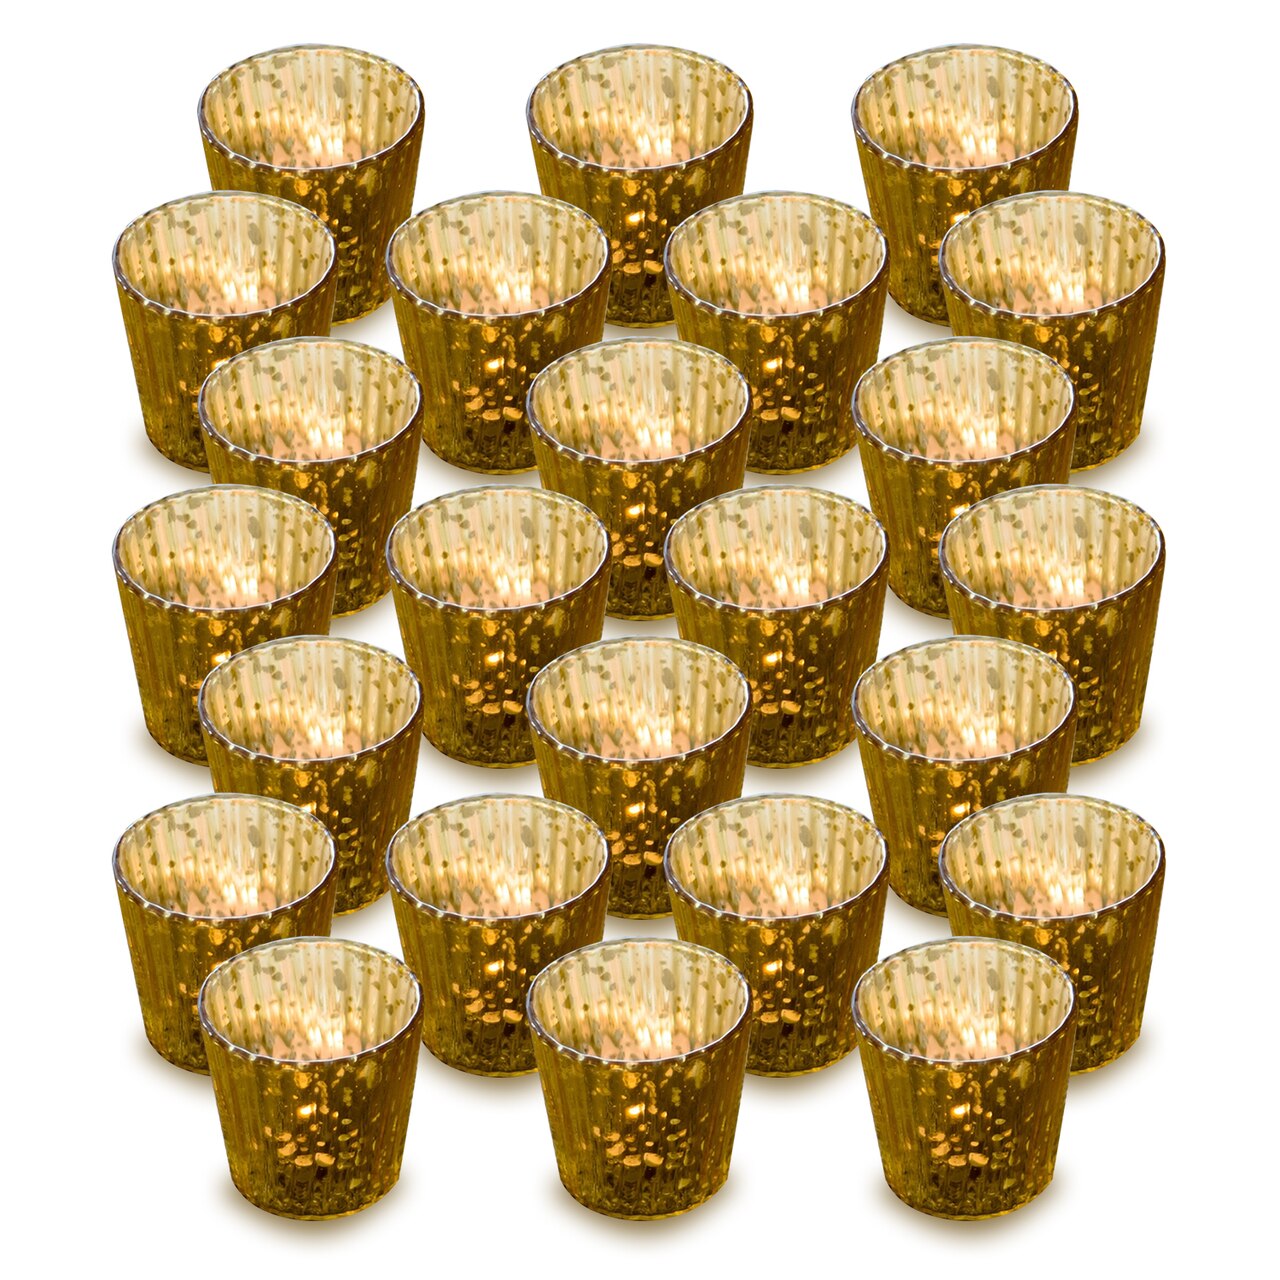 24 Pack | Vintage Mercury Glass Candle Holders (3-Inch, Caroline Design, Vertical Motif, Gold) - For use with Tea Lights - Home Decor, Parties and Wedding Decorations - PaperLanternStore.com - Paper Lanterns, Decor, Party Lights & More